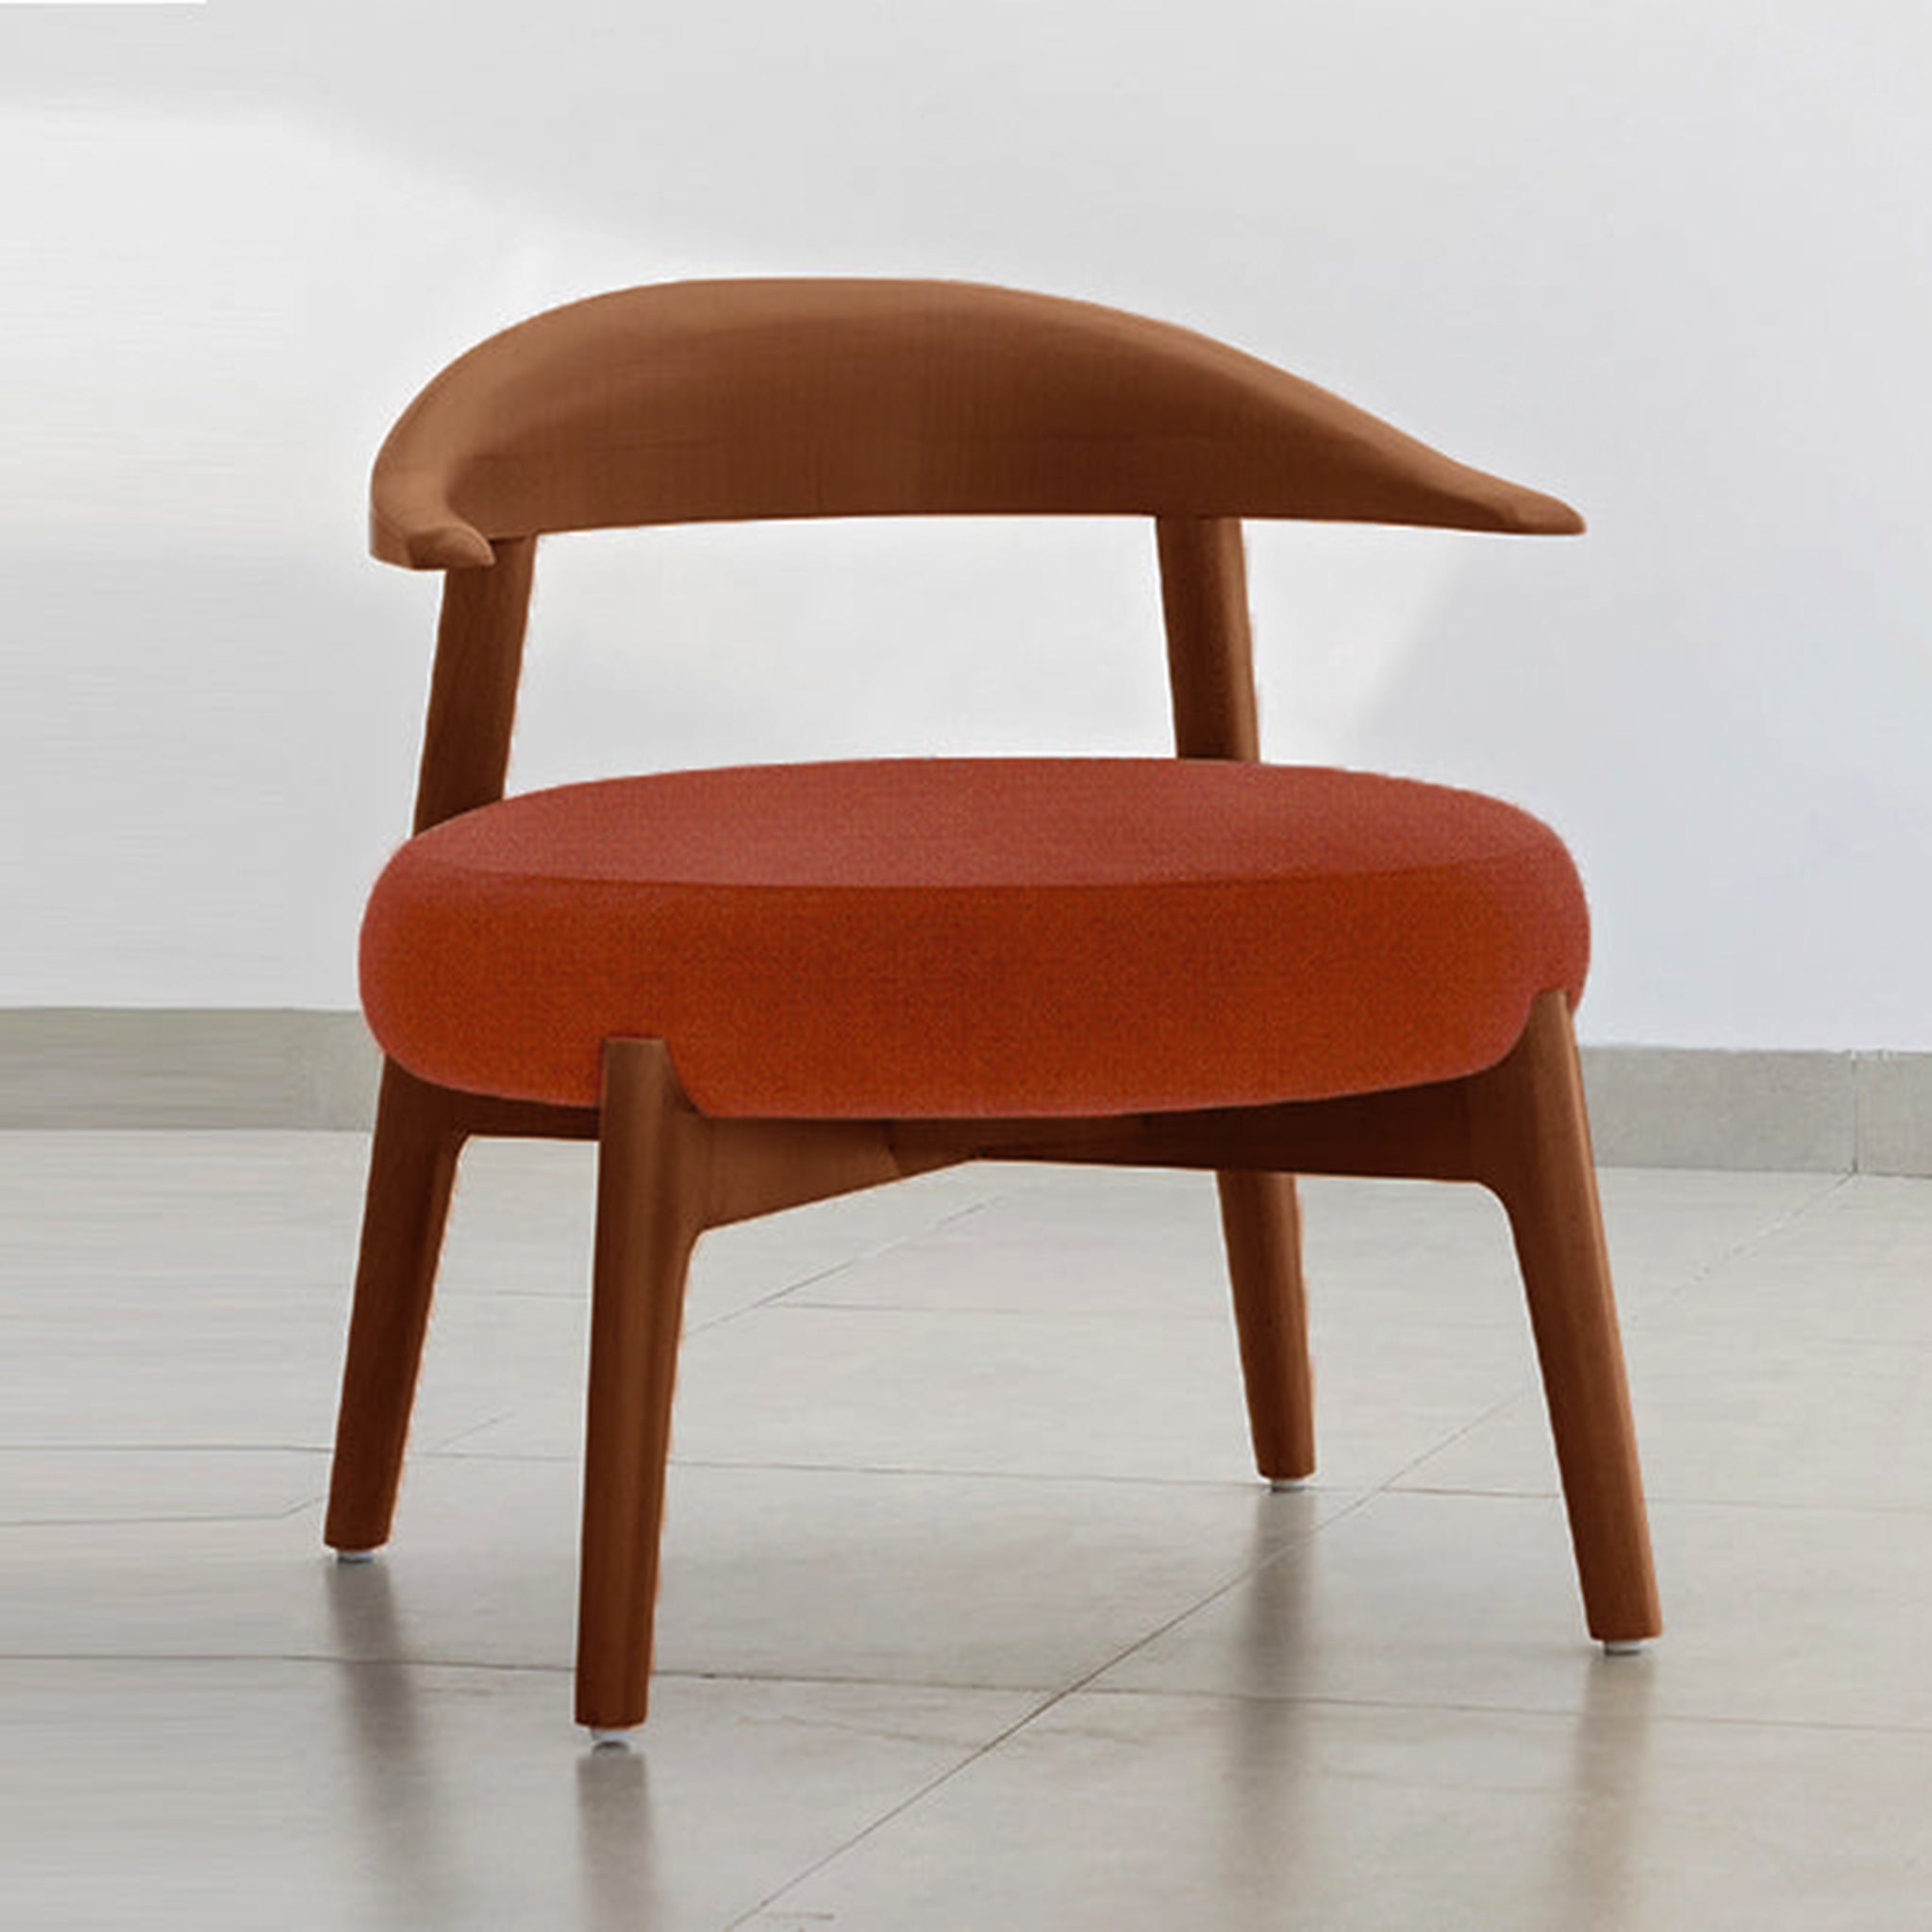 "The Hyde Accent Chair with ergonomic design and cozy seat"